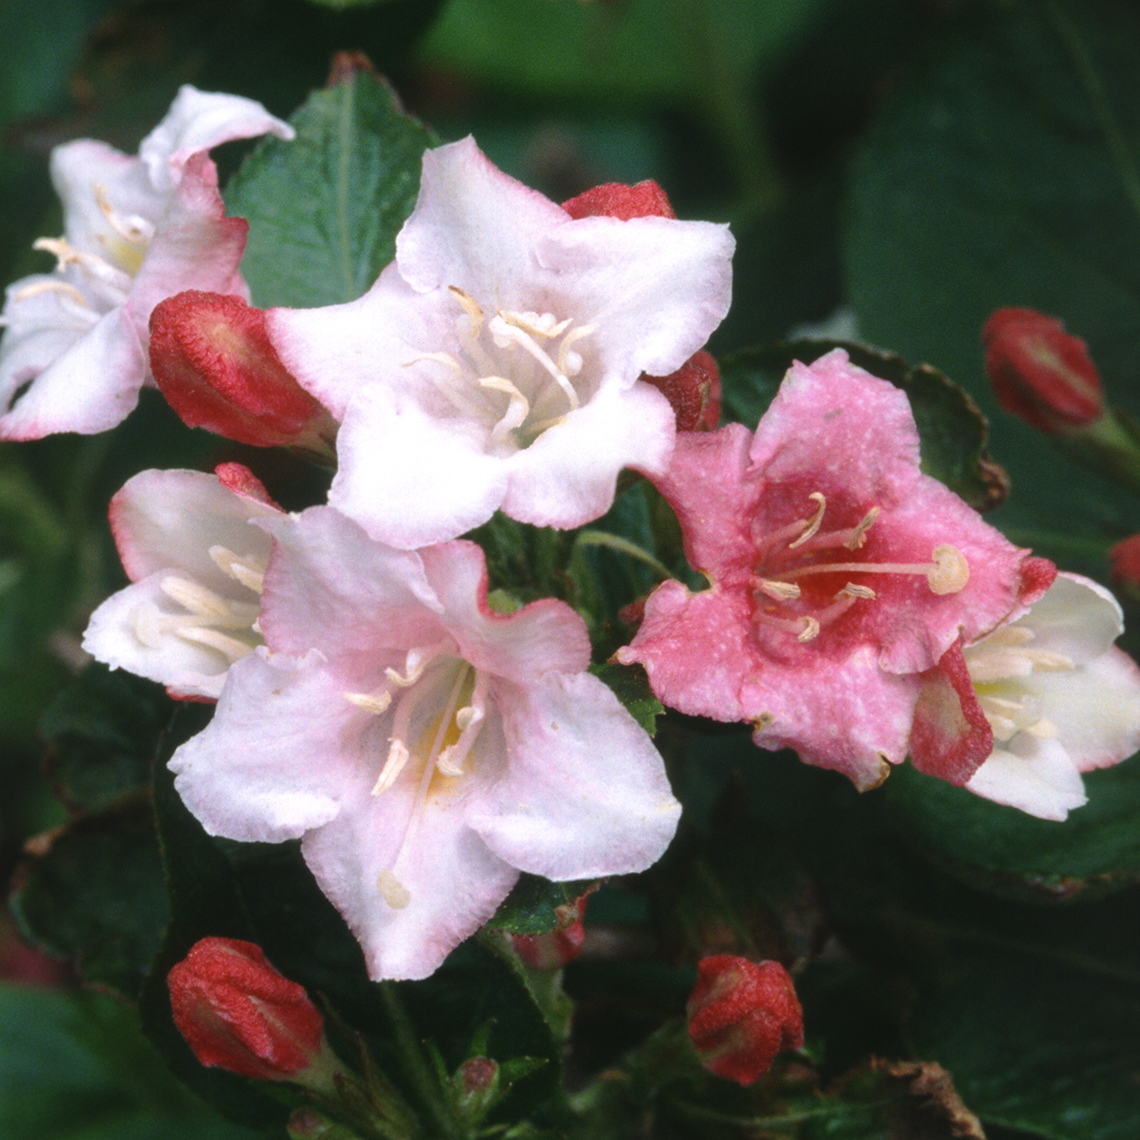 Closeup of the white pink and red flowers of Carnavale weigela